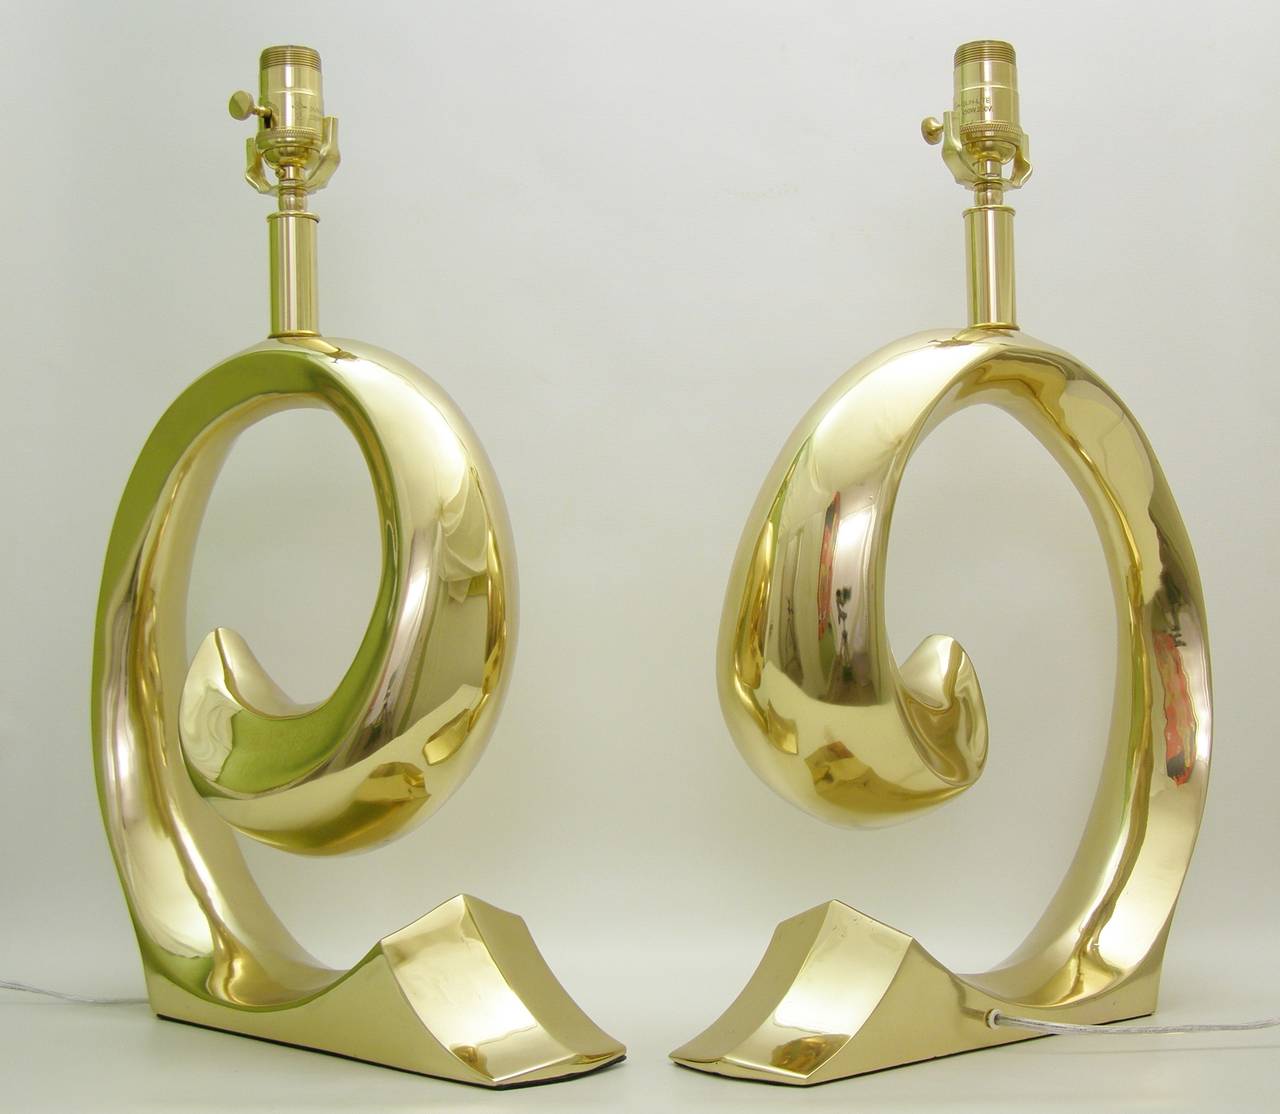 A pair of  Brass Pierre Cardin Lamps, with the Pierre Cardin Logo, newly restored and rewired, solid brass, polished and lacquered. Original finals included.
The overall height is 20